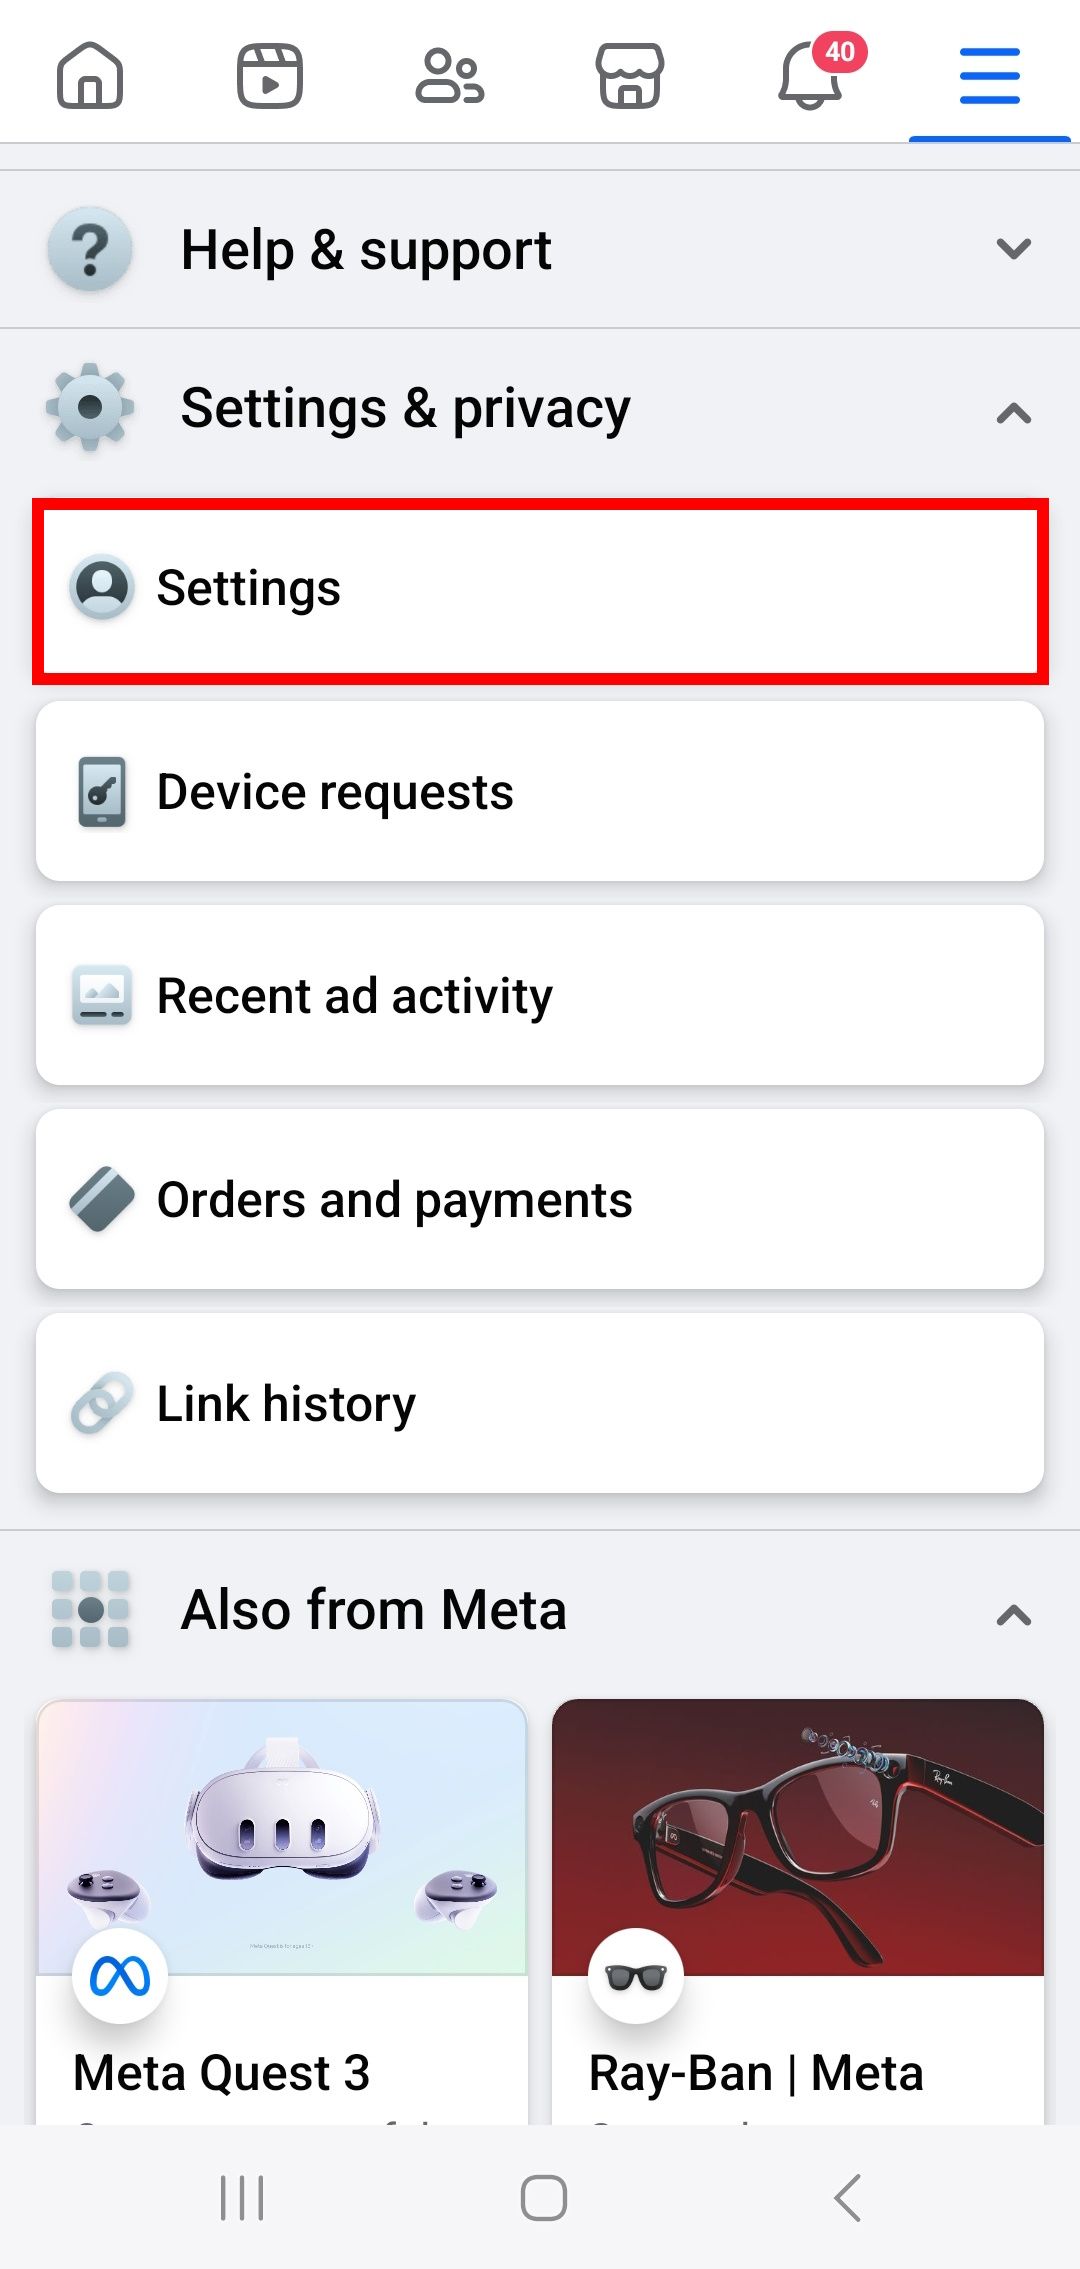 red rectangle outline over settings in settings & privacy menu